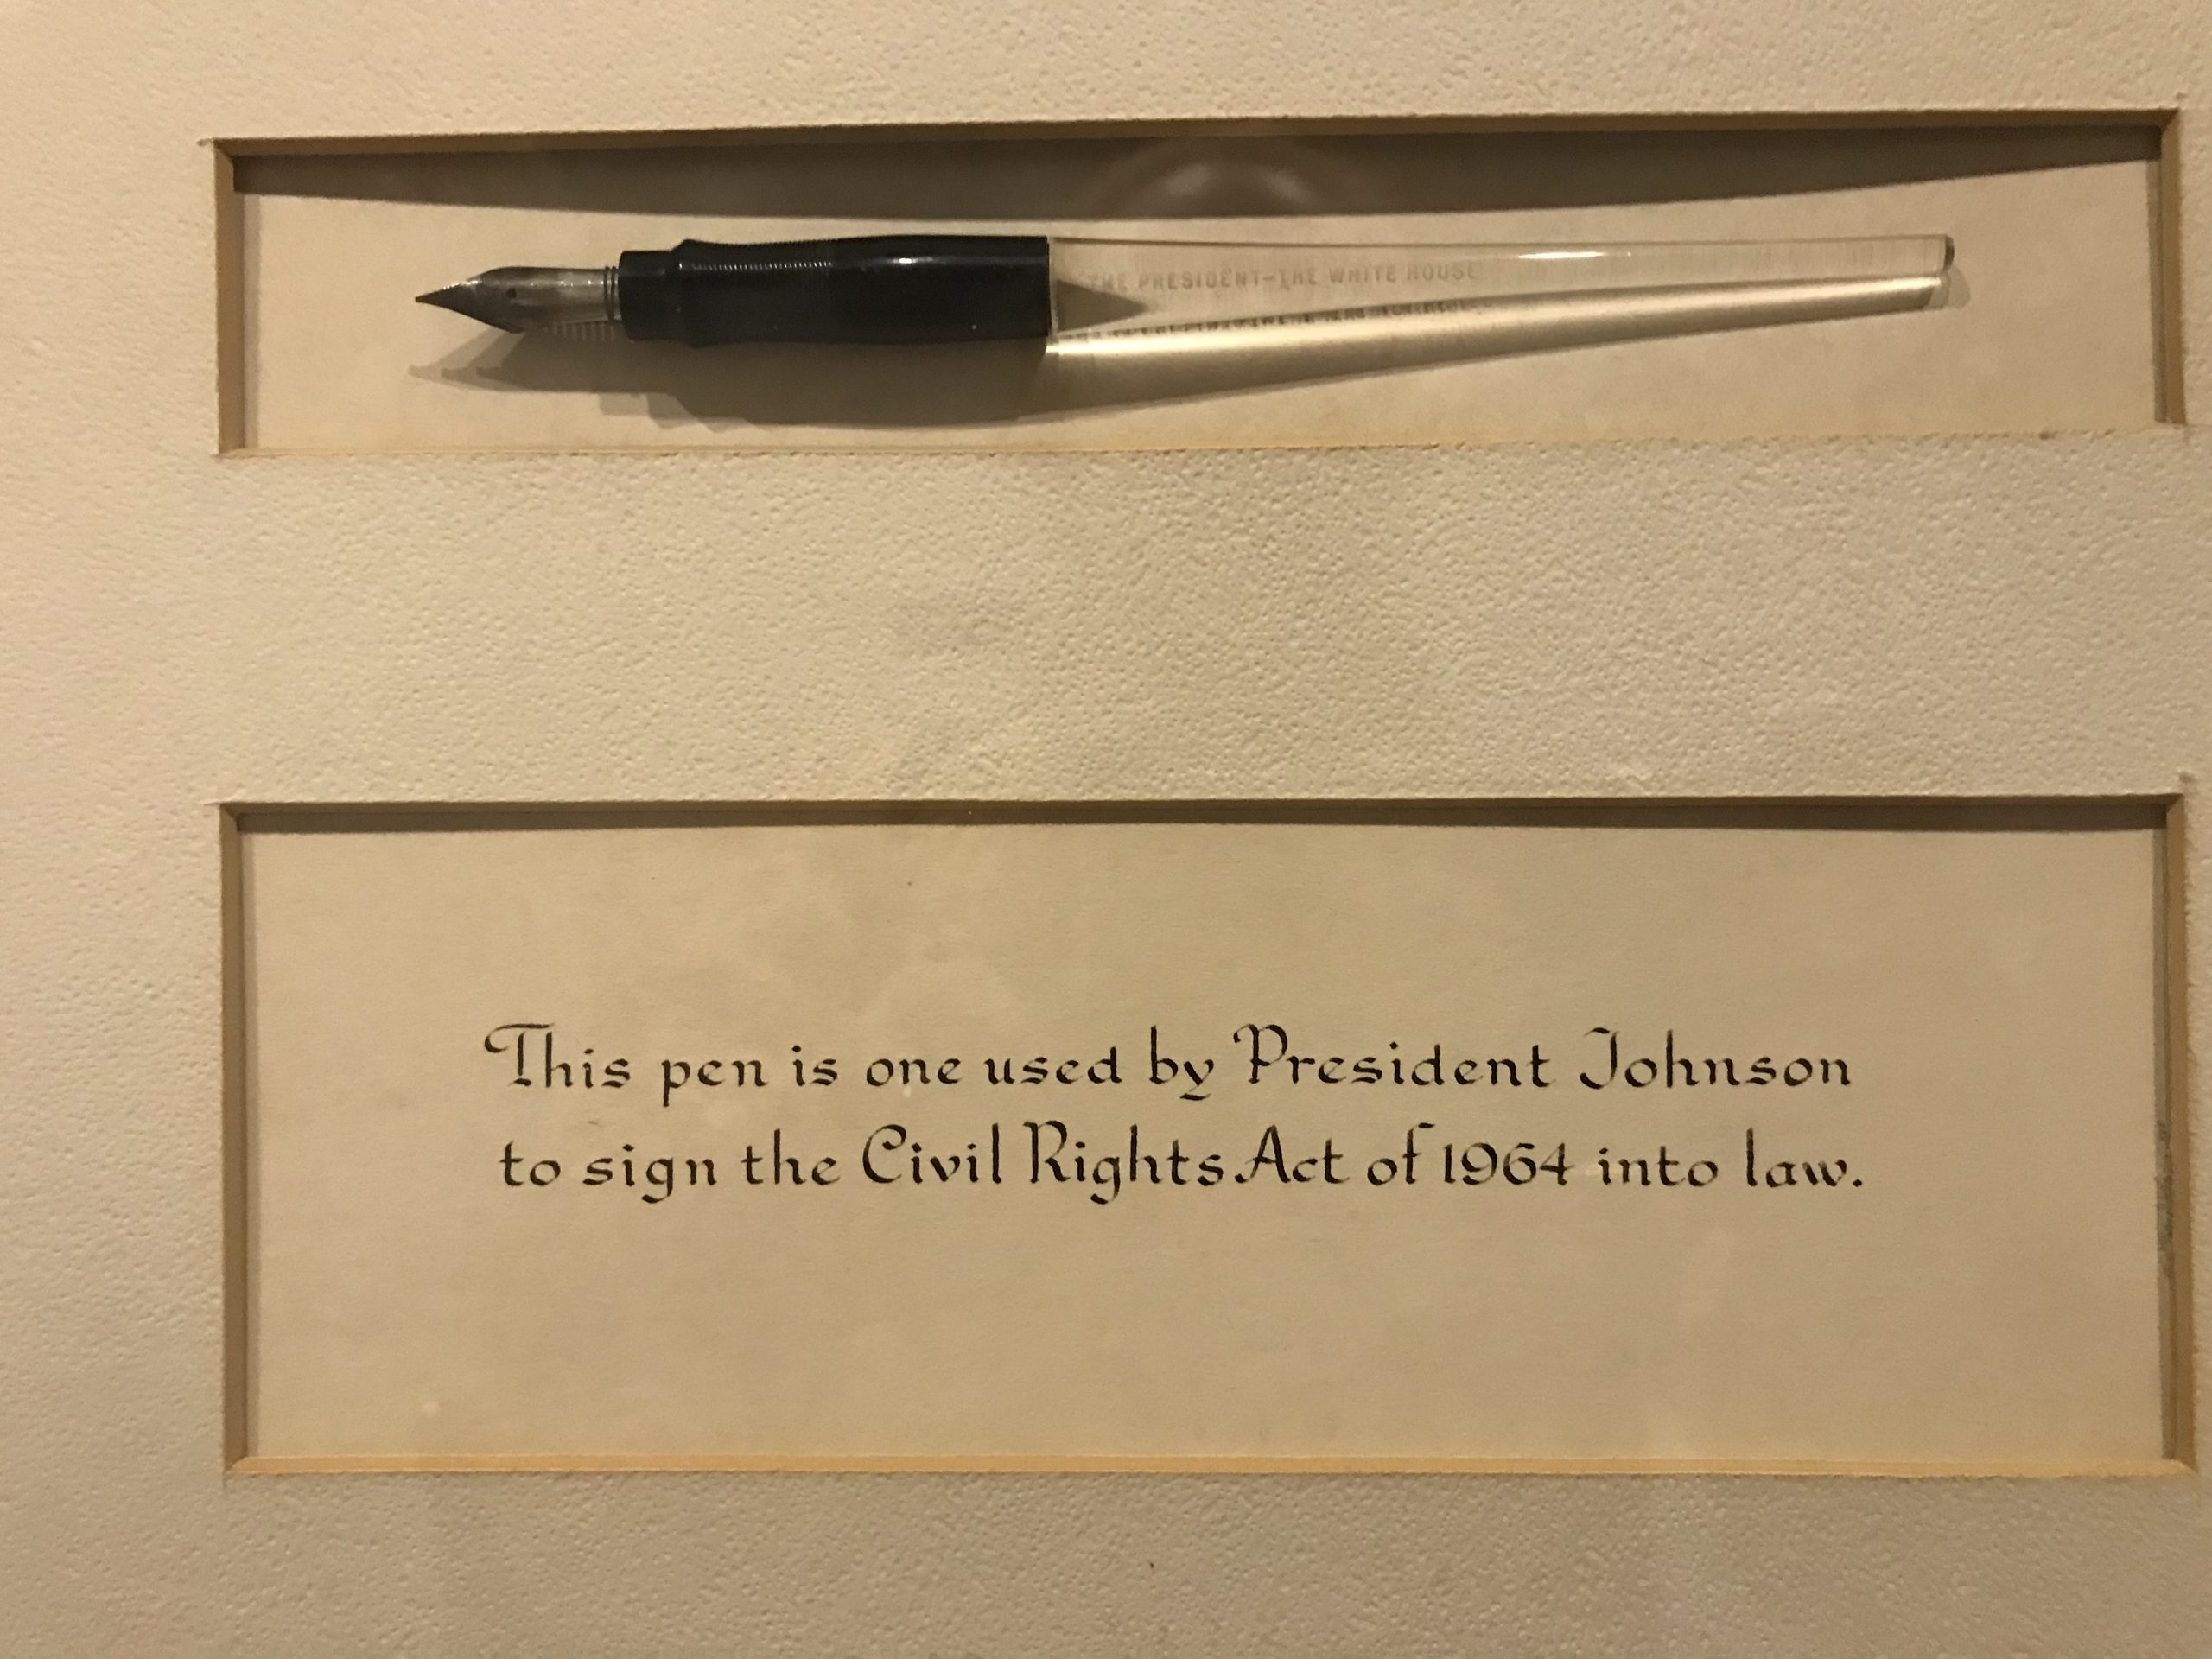 Pen used to sign the Civil Rights Act by President Johnson.